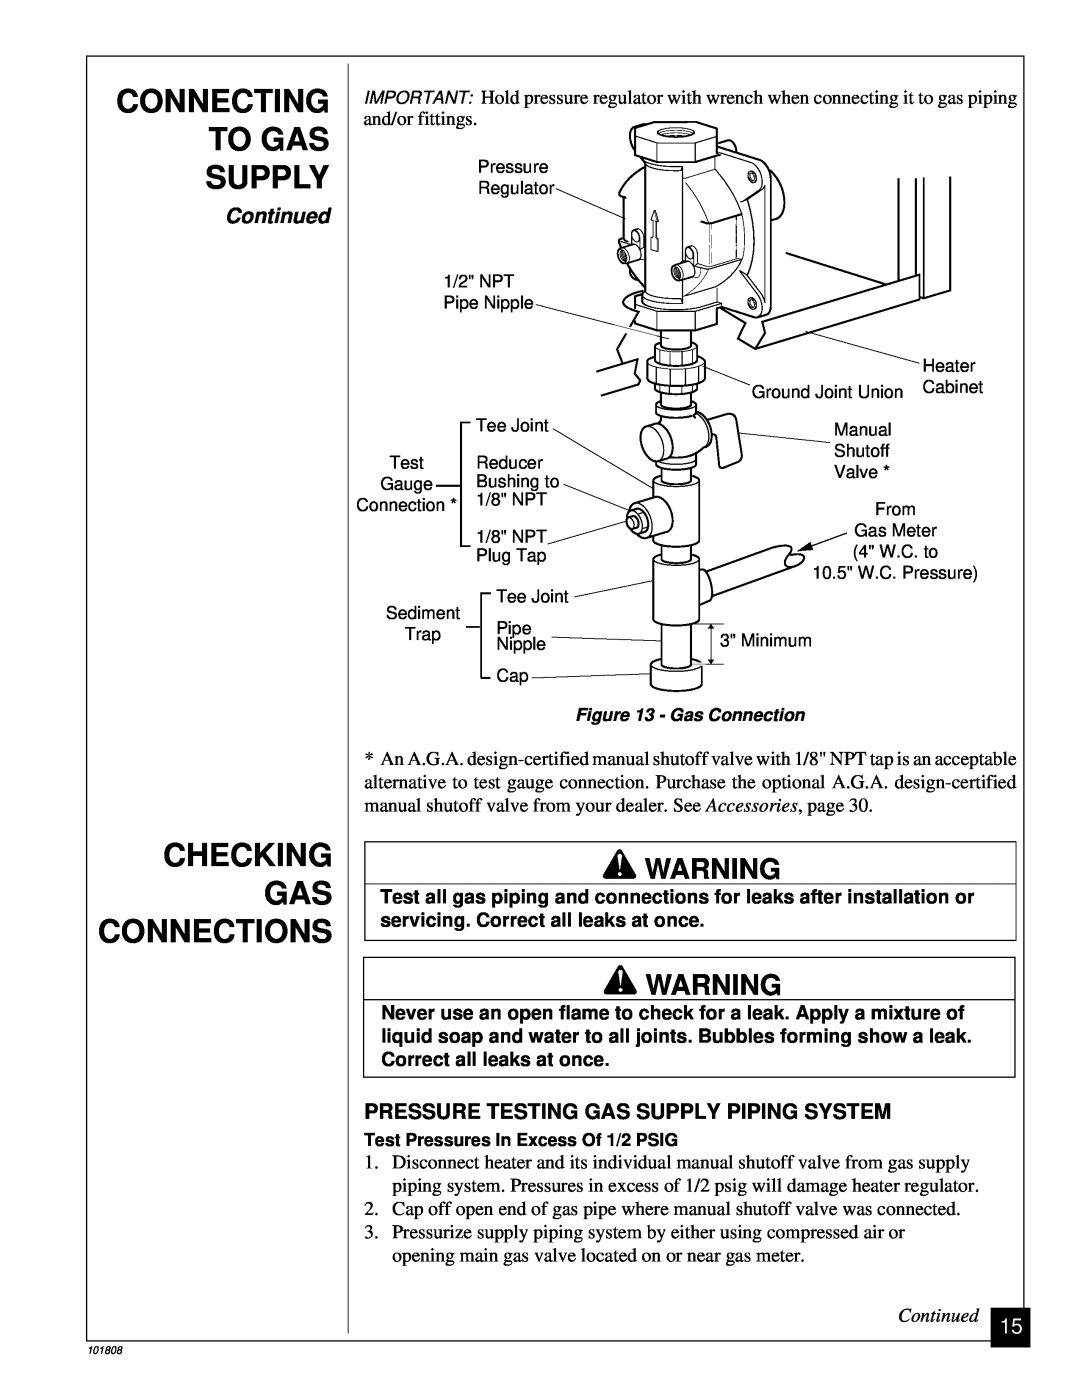 Desa Tech 18, B, 28 Checking, Connections, Connecting, To Gas, Supply, Continued, servicing. Correct all leaks at once 